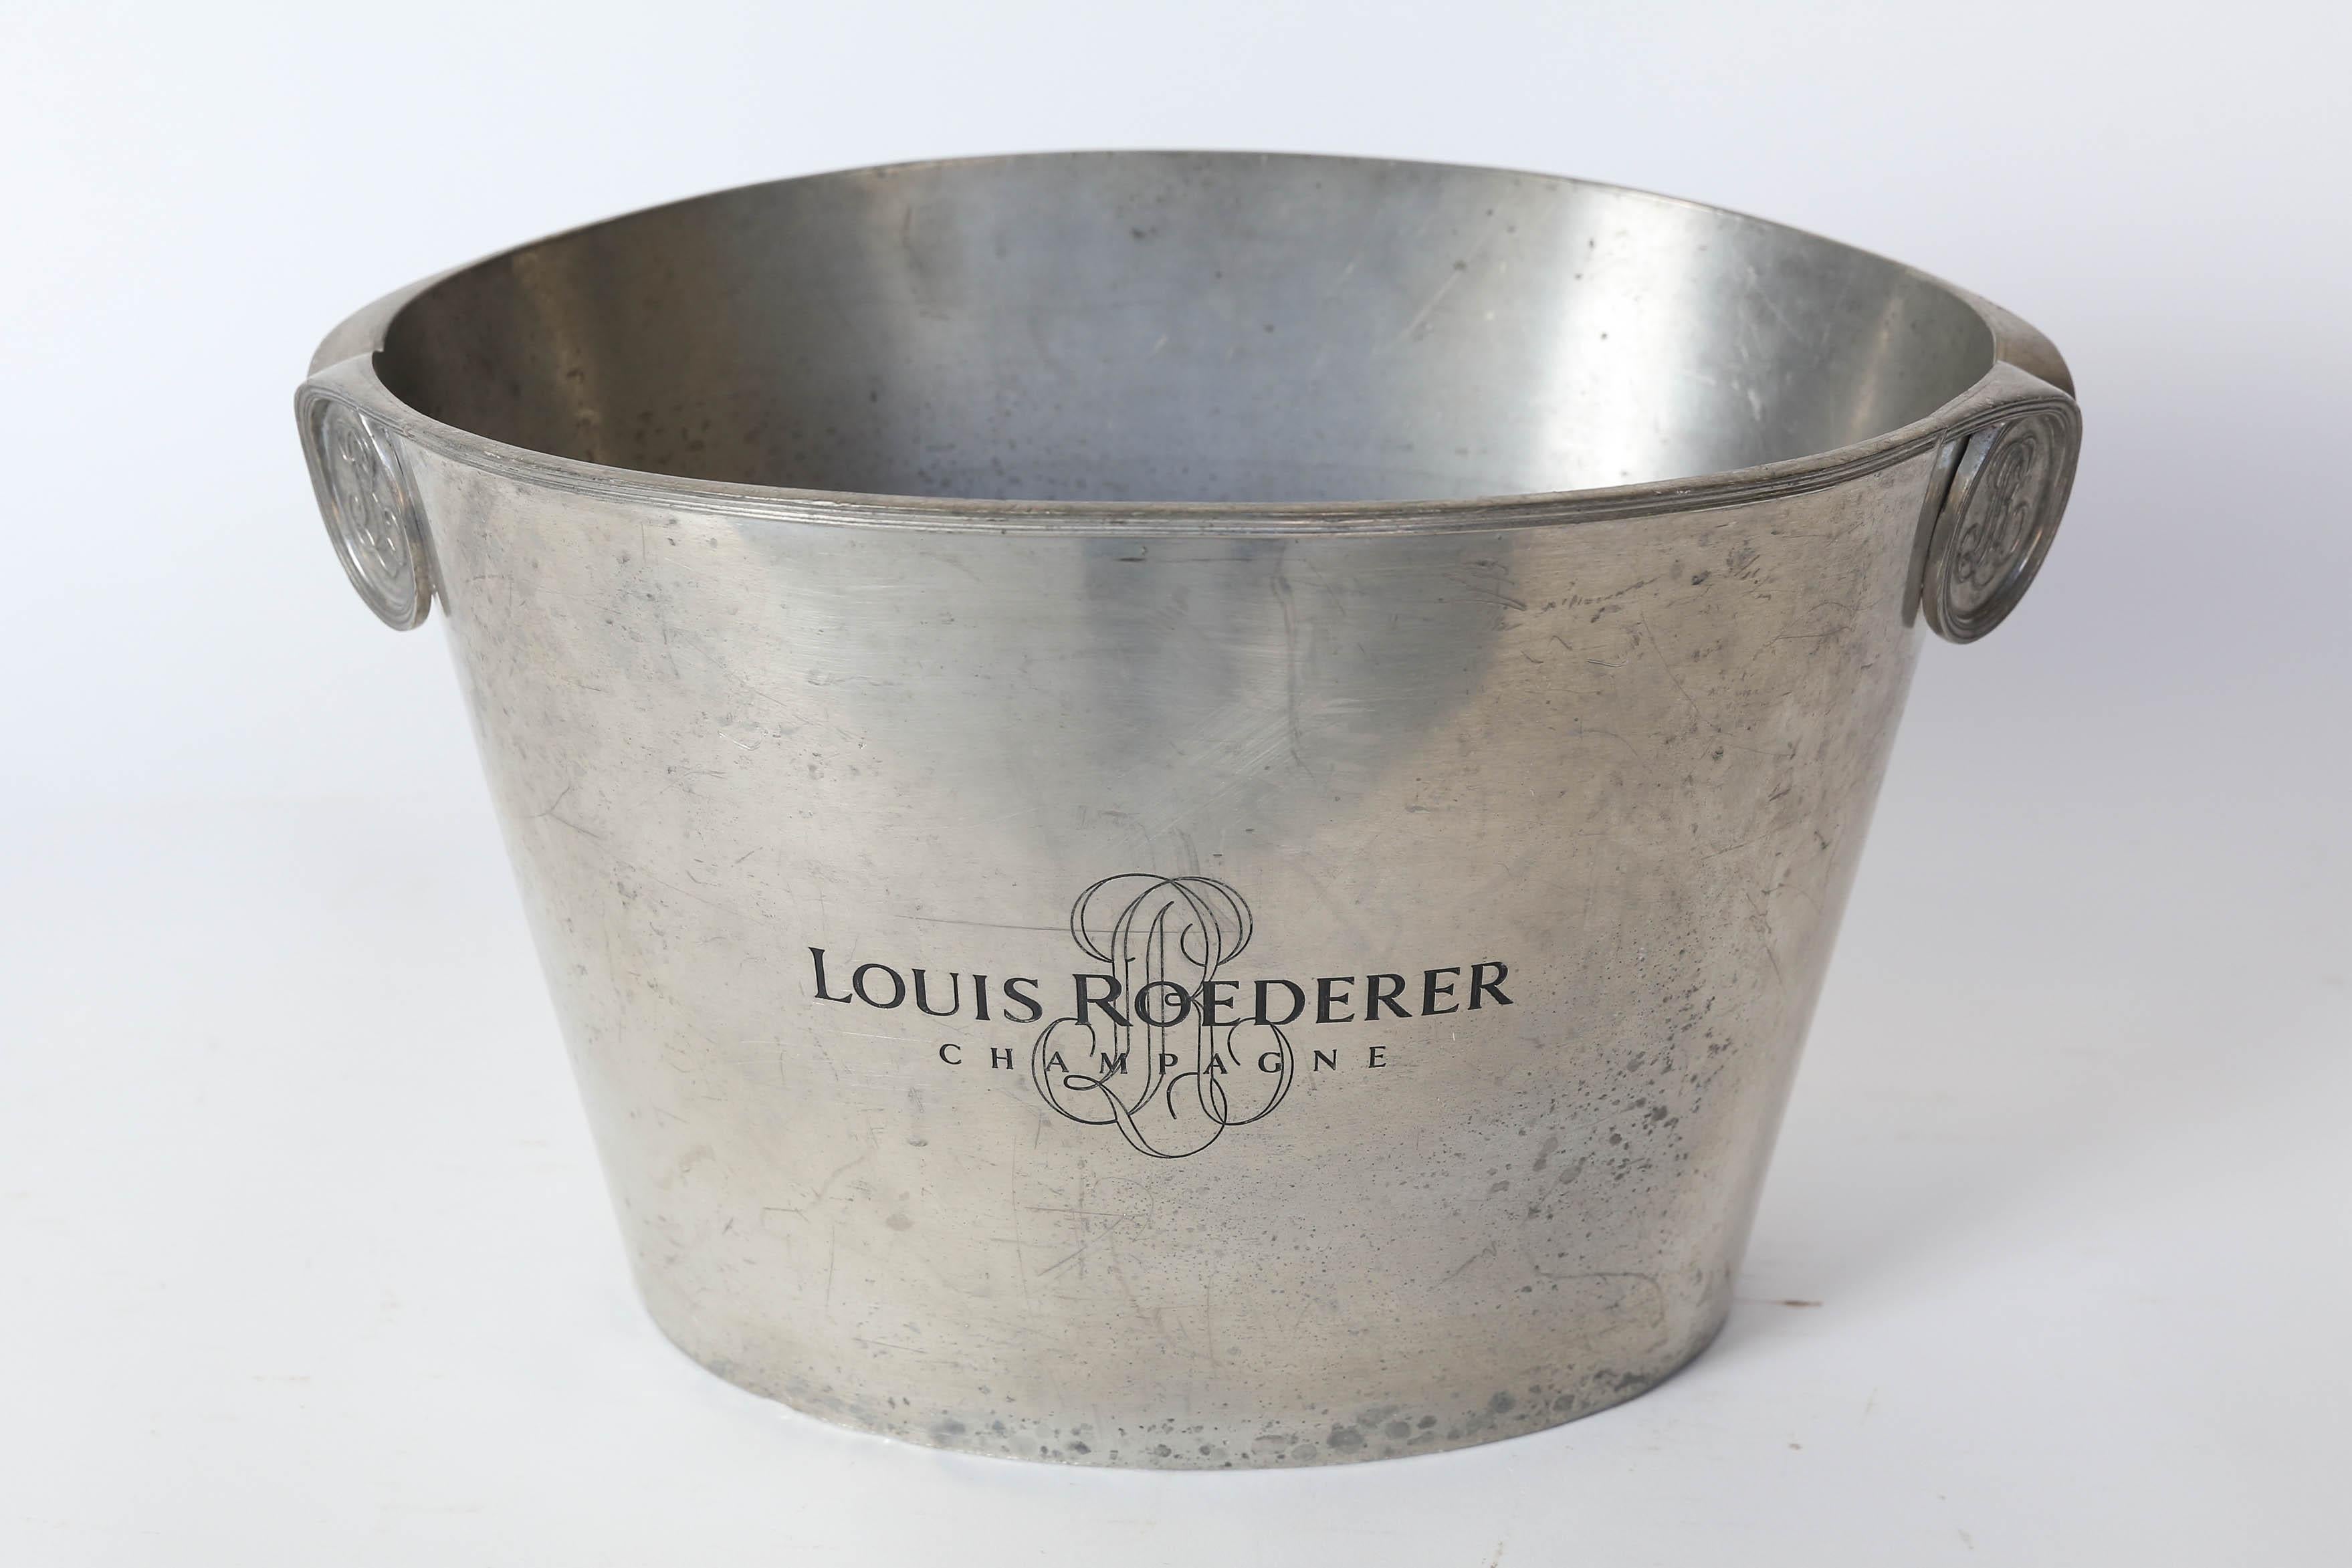 A lovely double champagne cooler from the House of Louis Roederer, one of the last great independent and family run champagne houses.